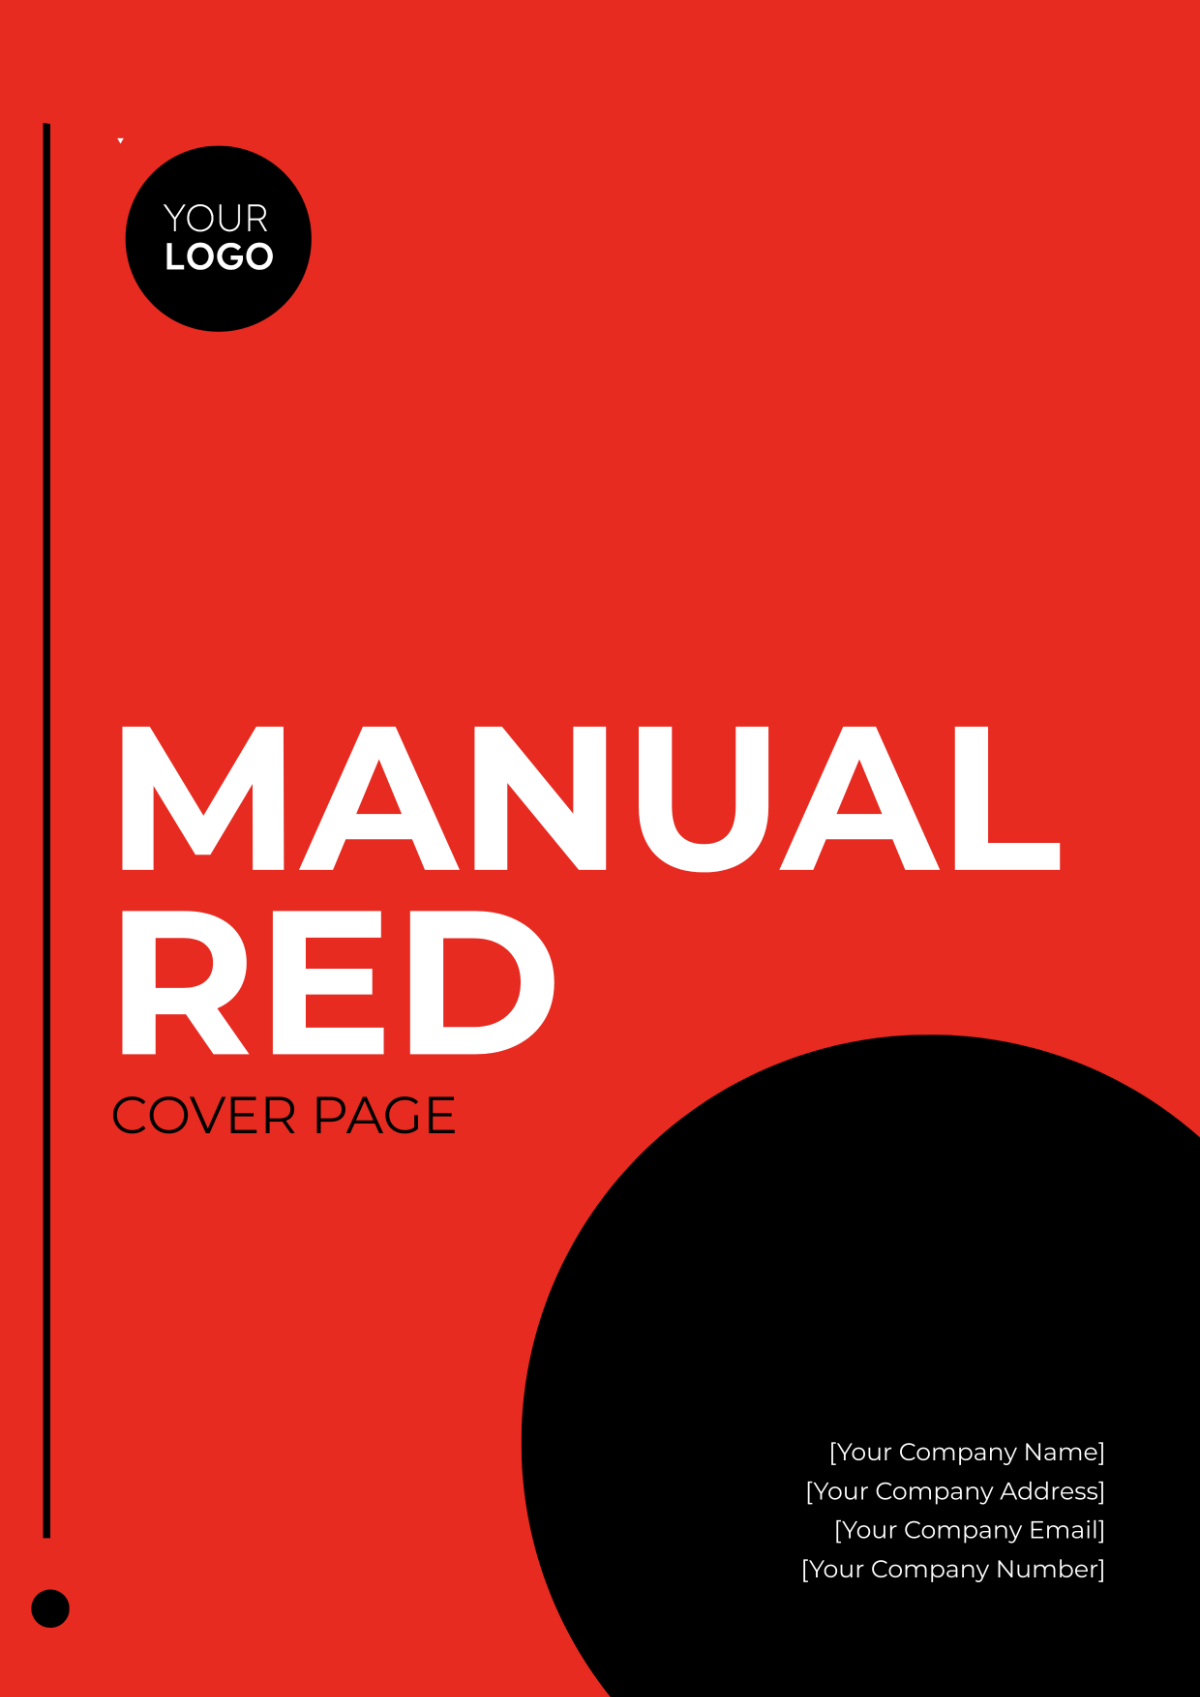 Manual Red Cover Page